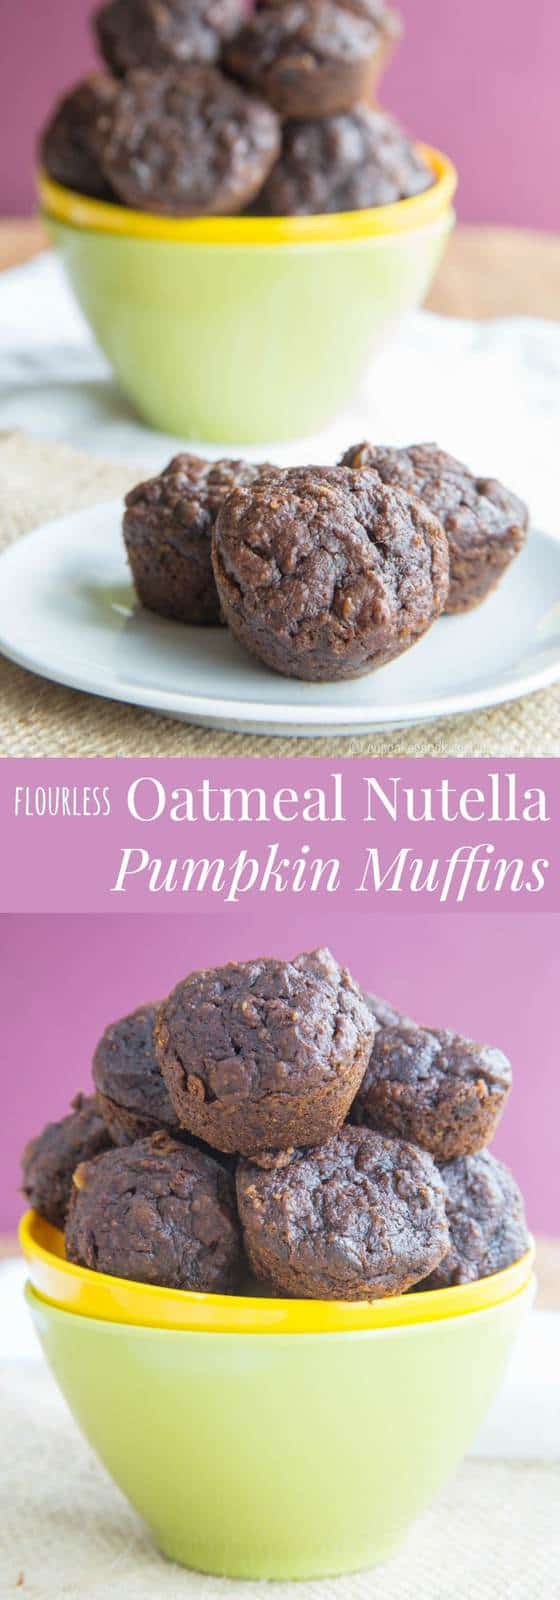 Flourless Oatmeal Nutella Pumpkin Muffins - a healthy sweet treat for breakfast or snack! Plus they are naturally gluten free.